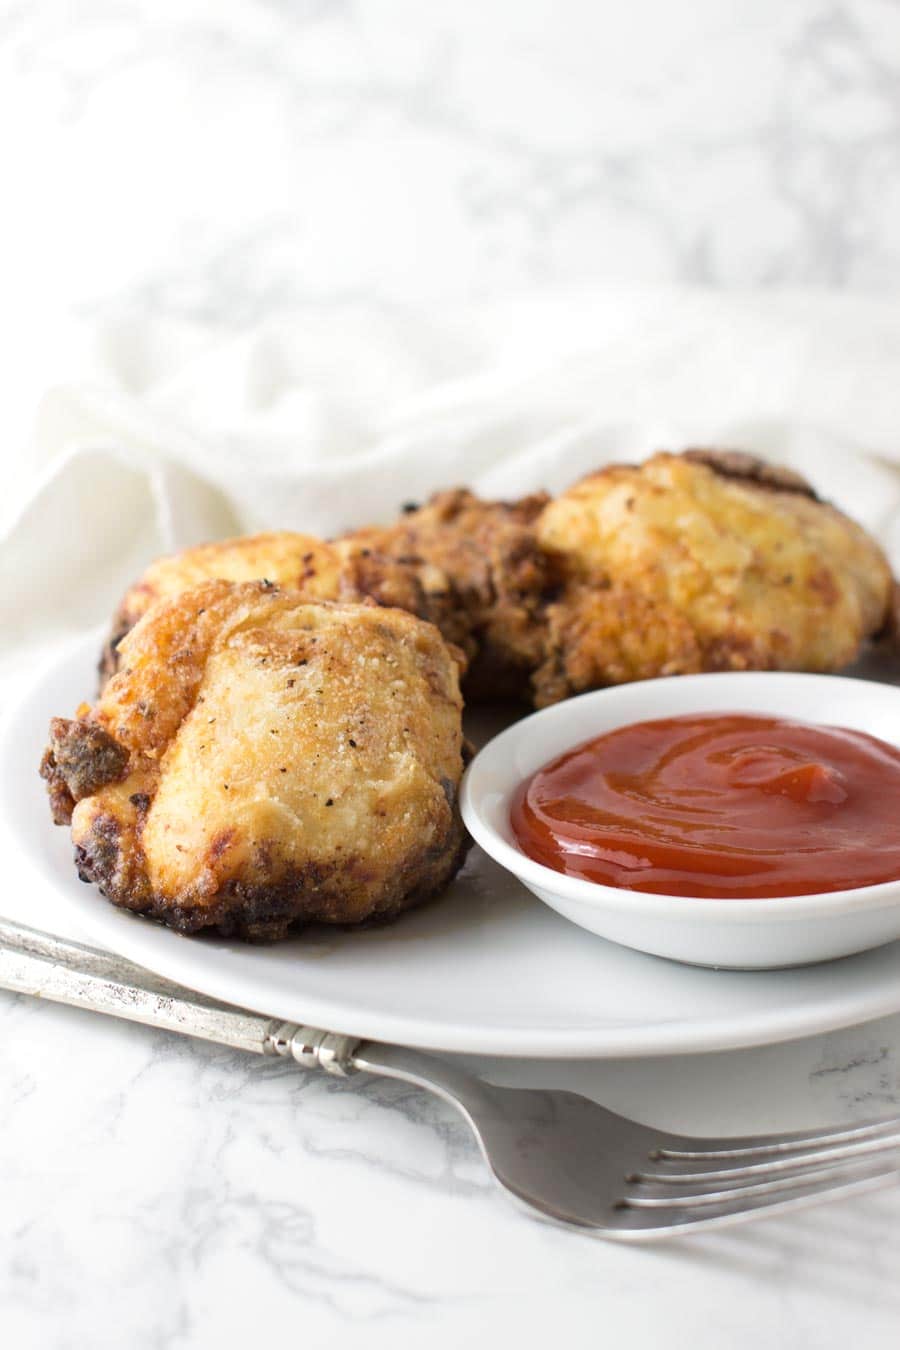 Southern Fried Chicken recipe on acleanplate.com #paleo #recipe #healthy